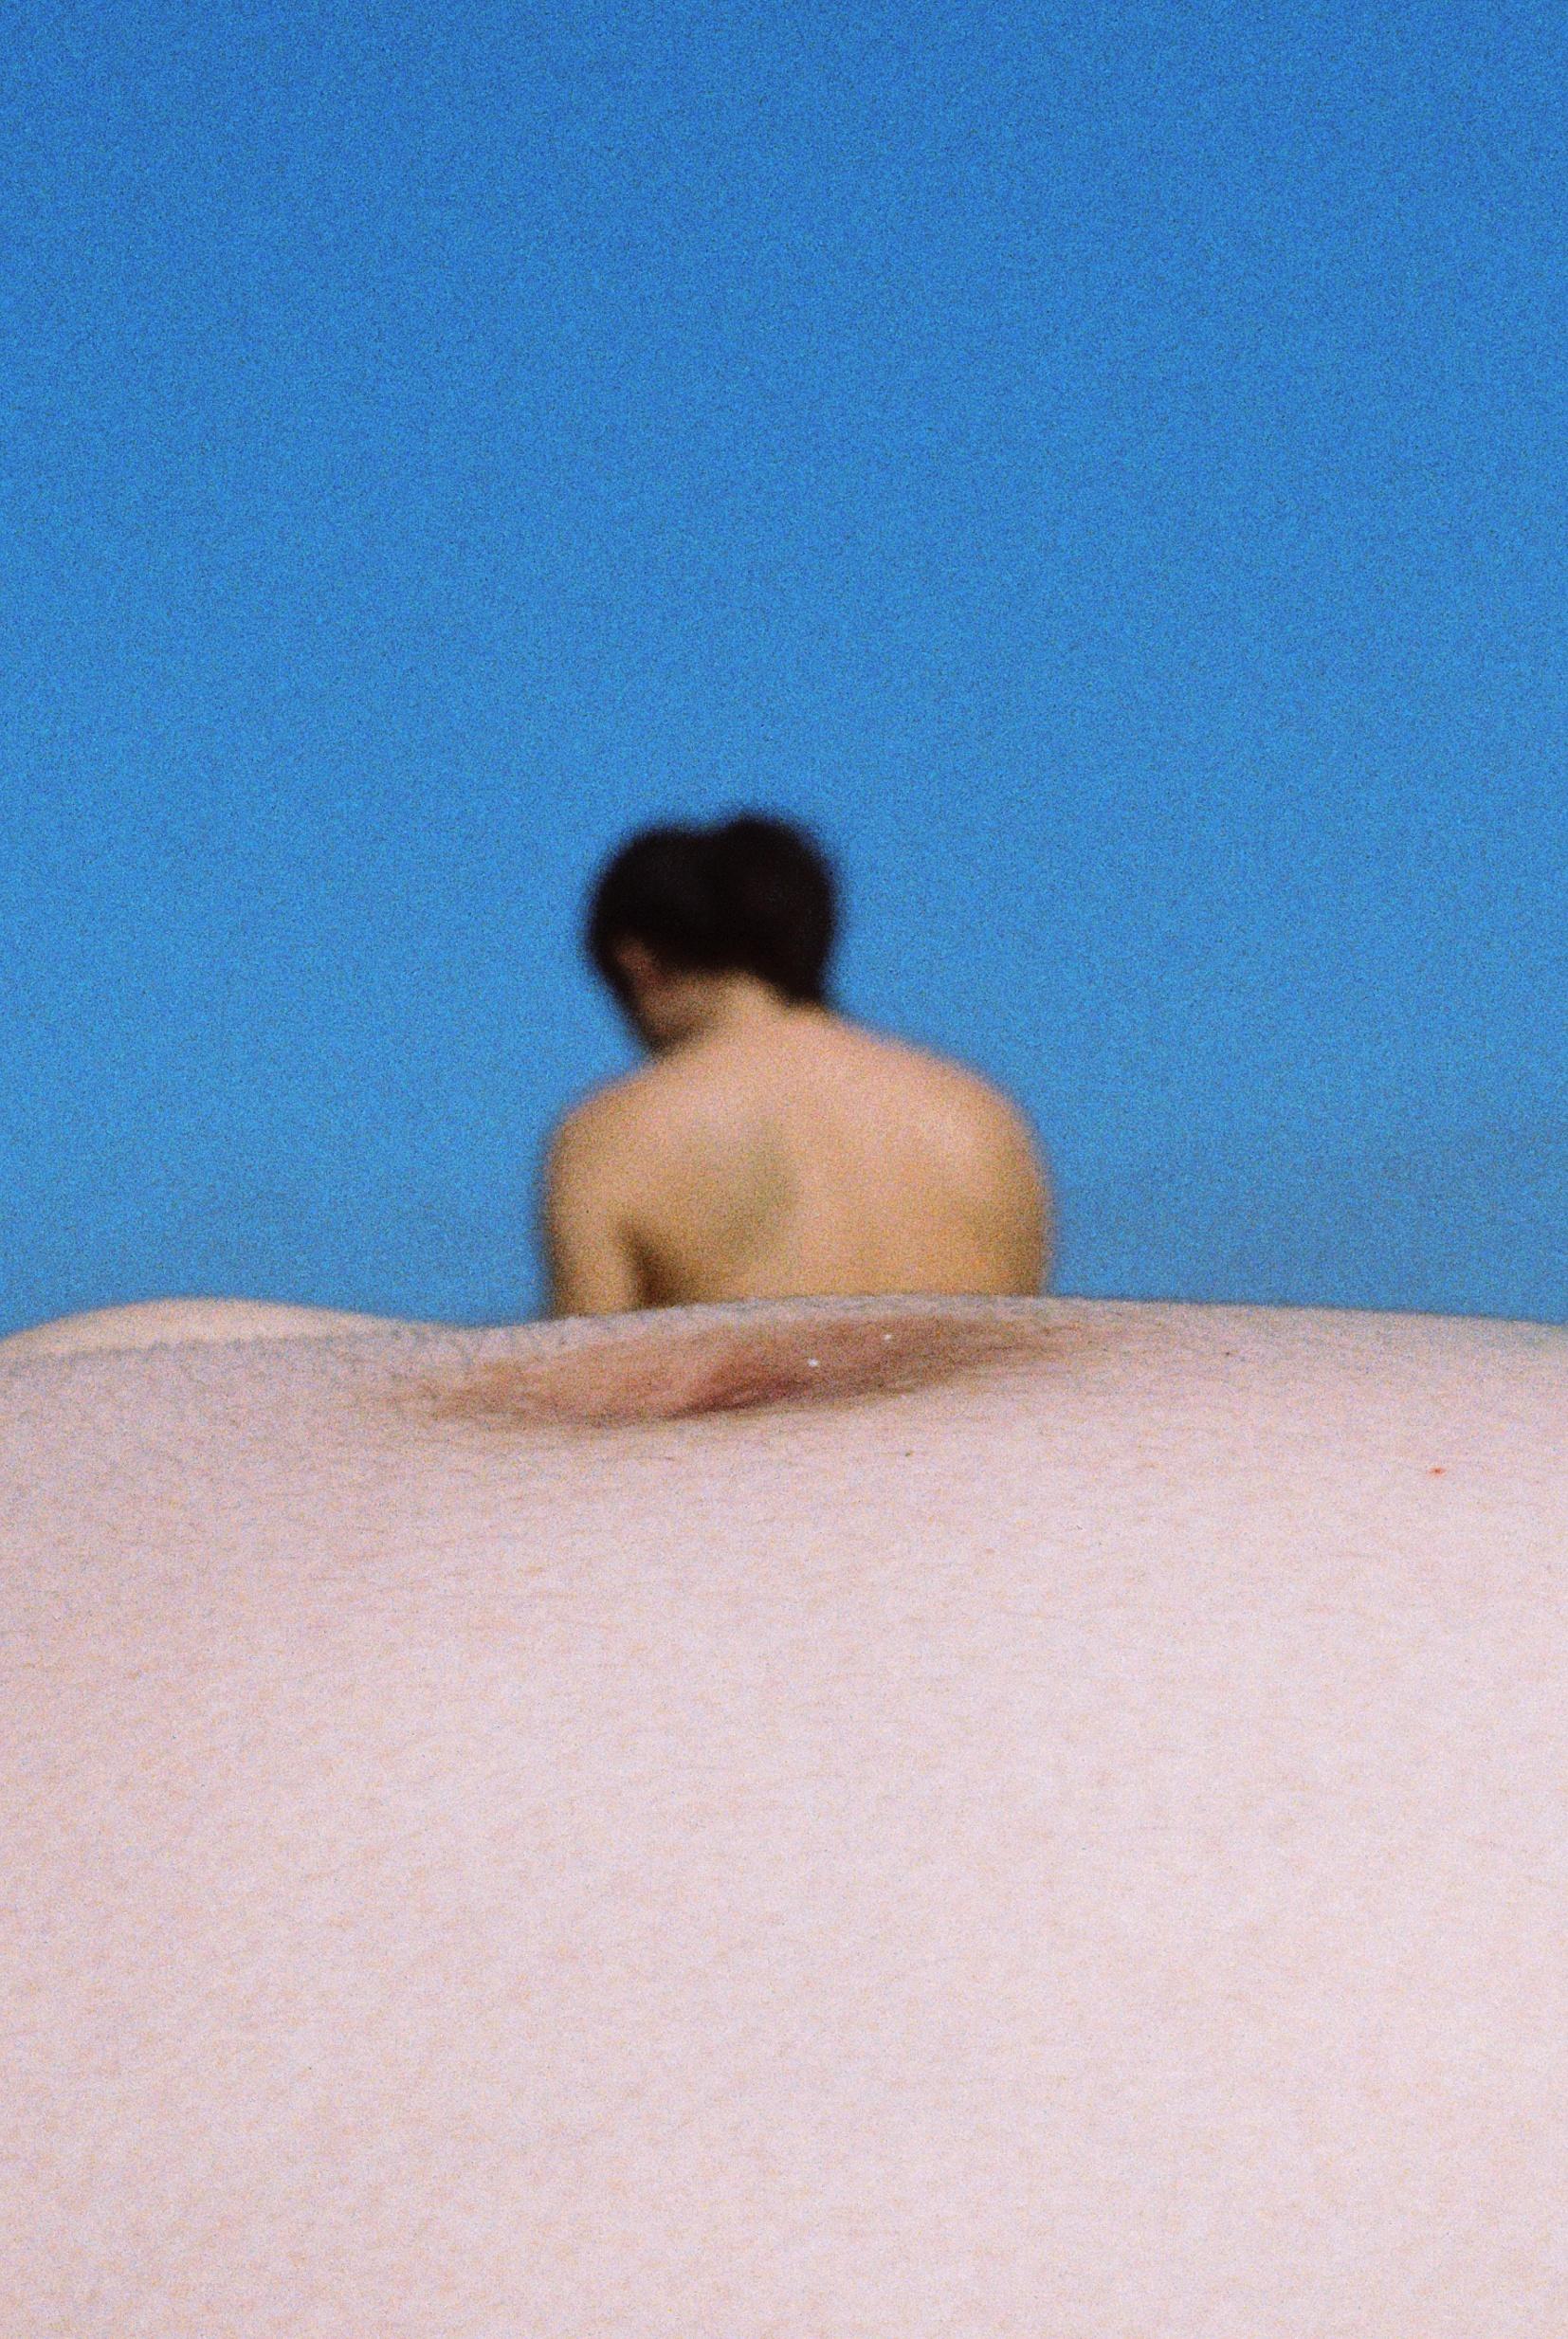 People on the beach 7 – John Yuyi, Nude, Human Figure, Photography, Abstract For Sale 1